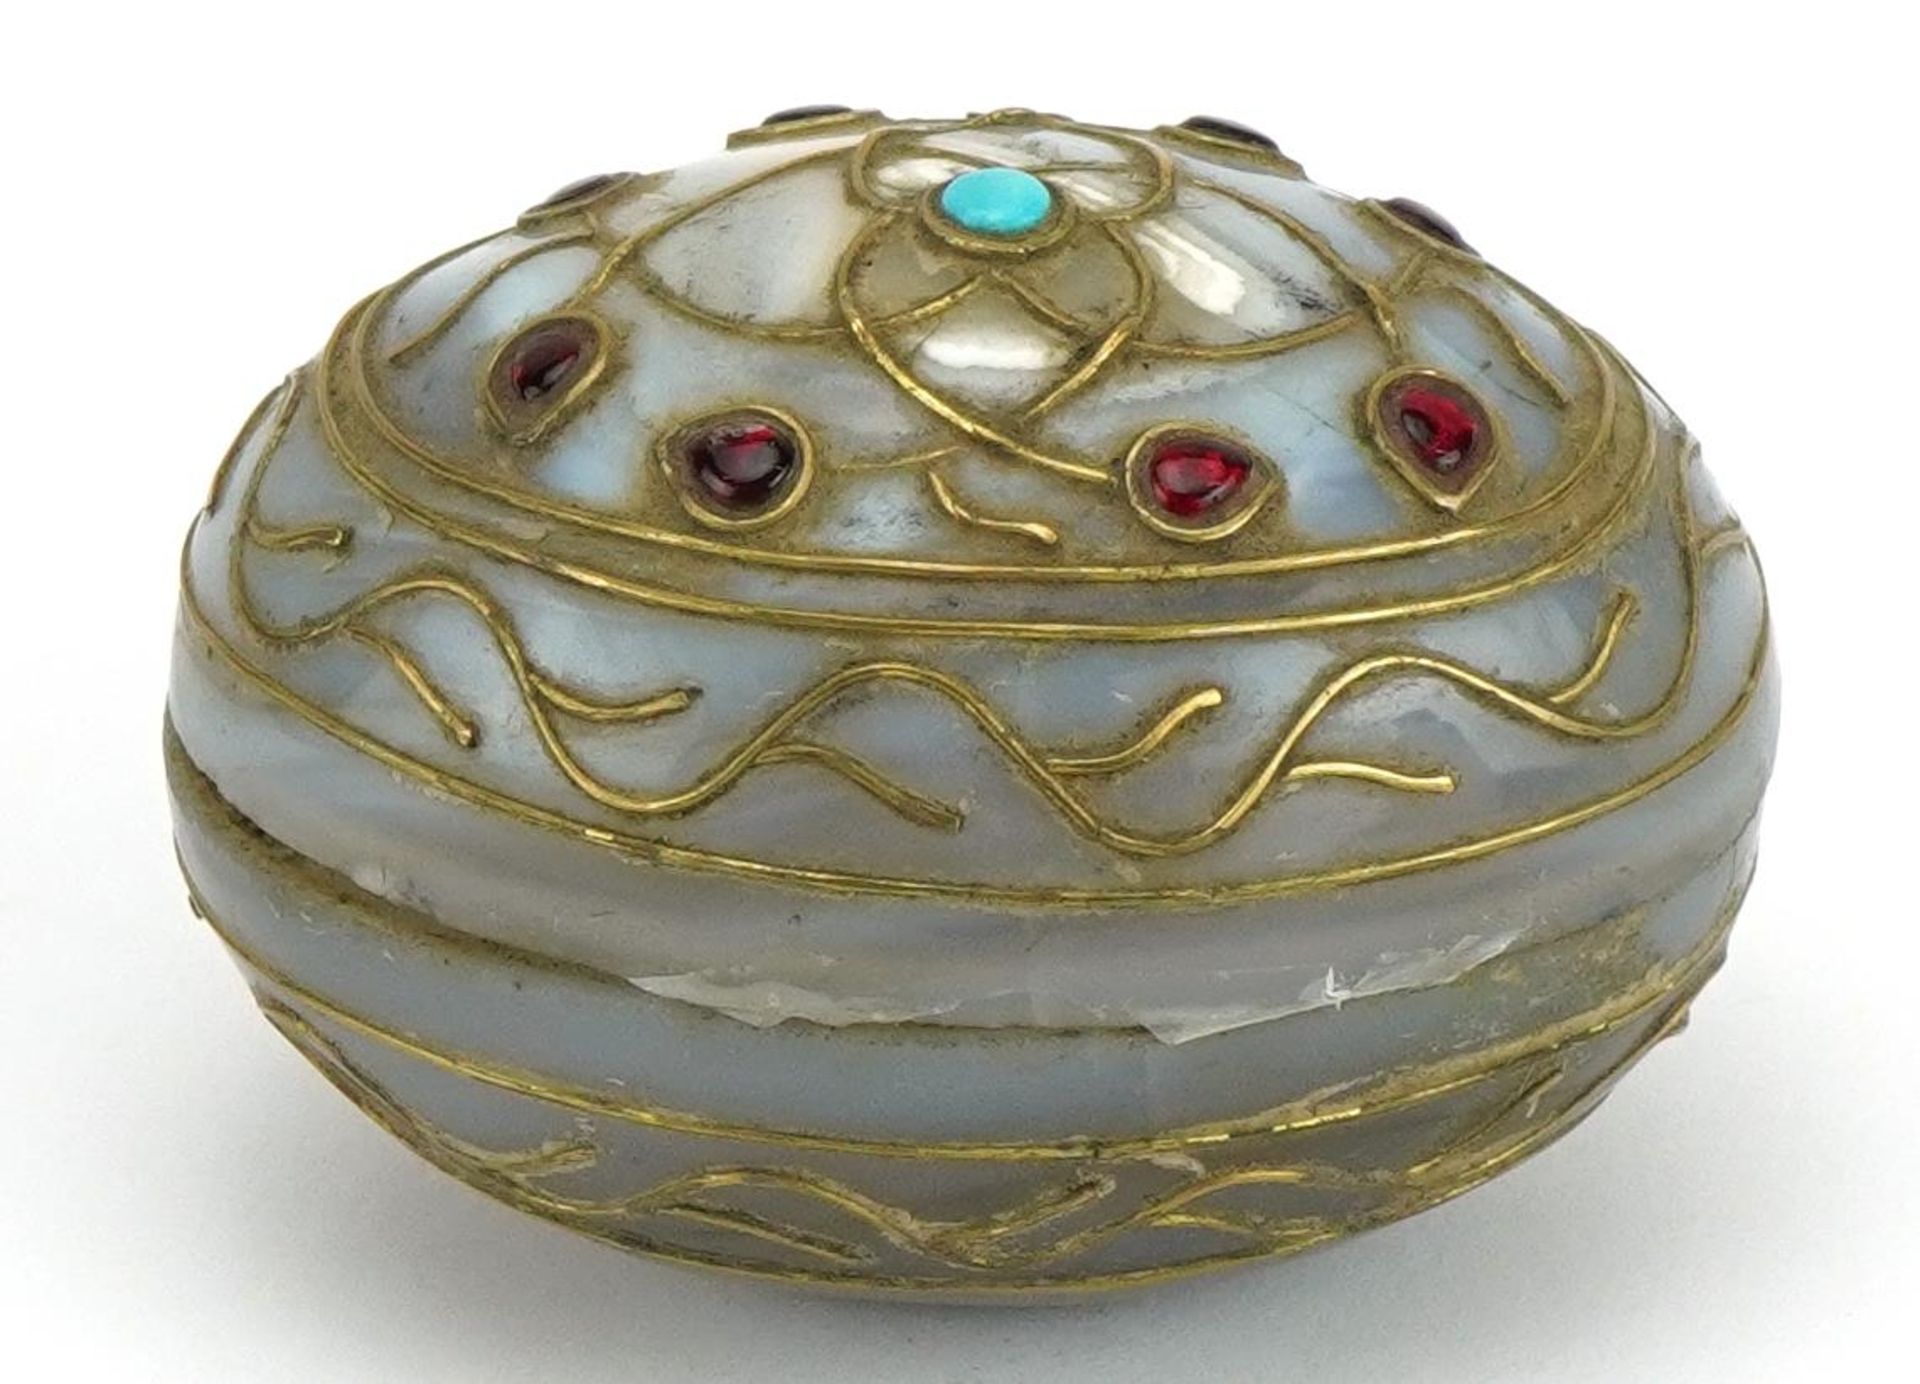 Islamic agate egg shaped box and cover inlaid with stone and metal inlay, 6cm in length - Image 3 of 4